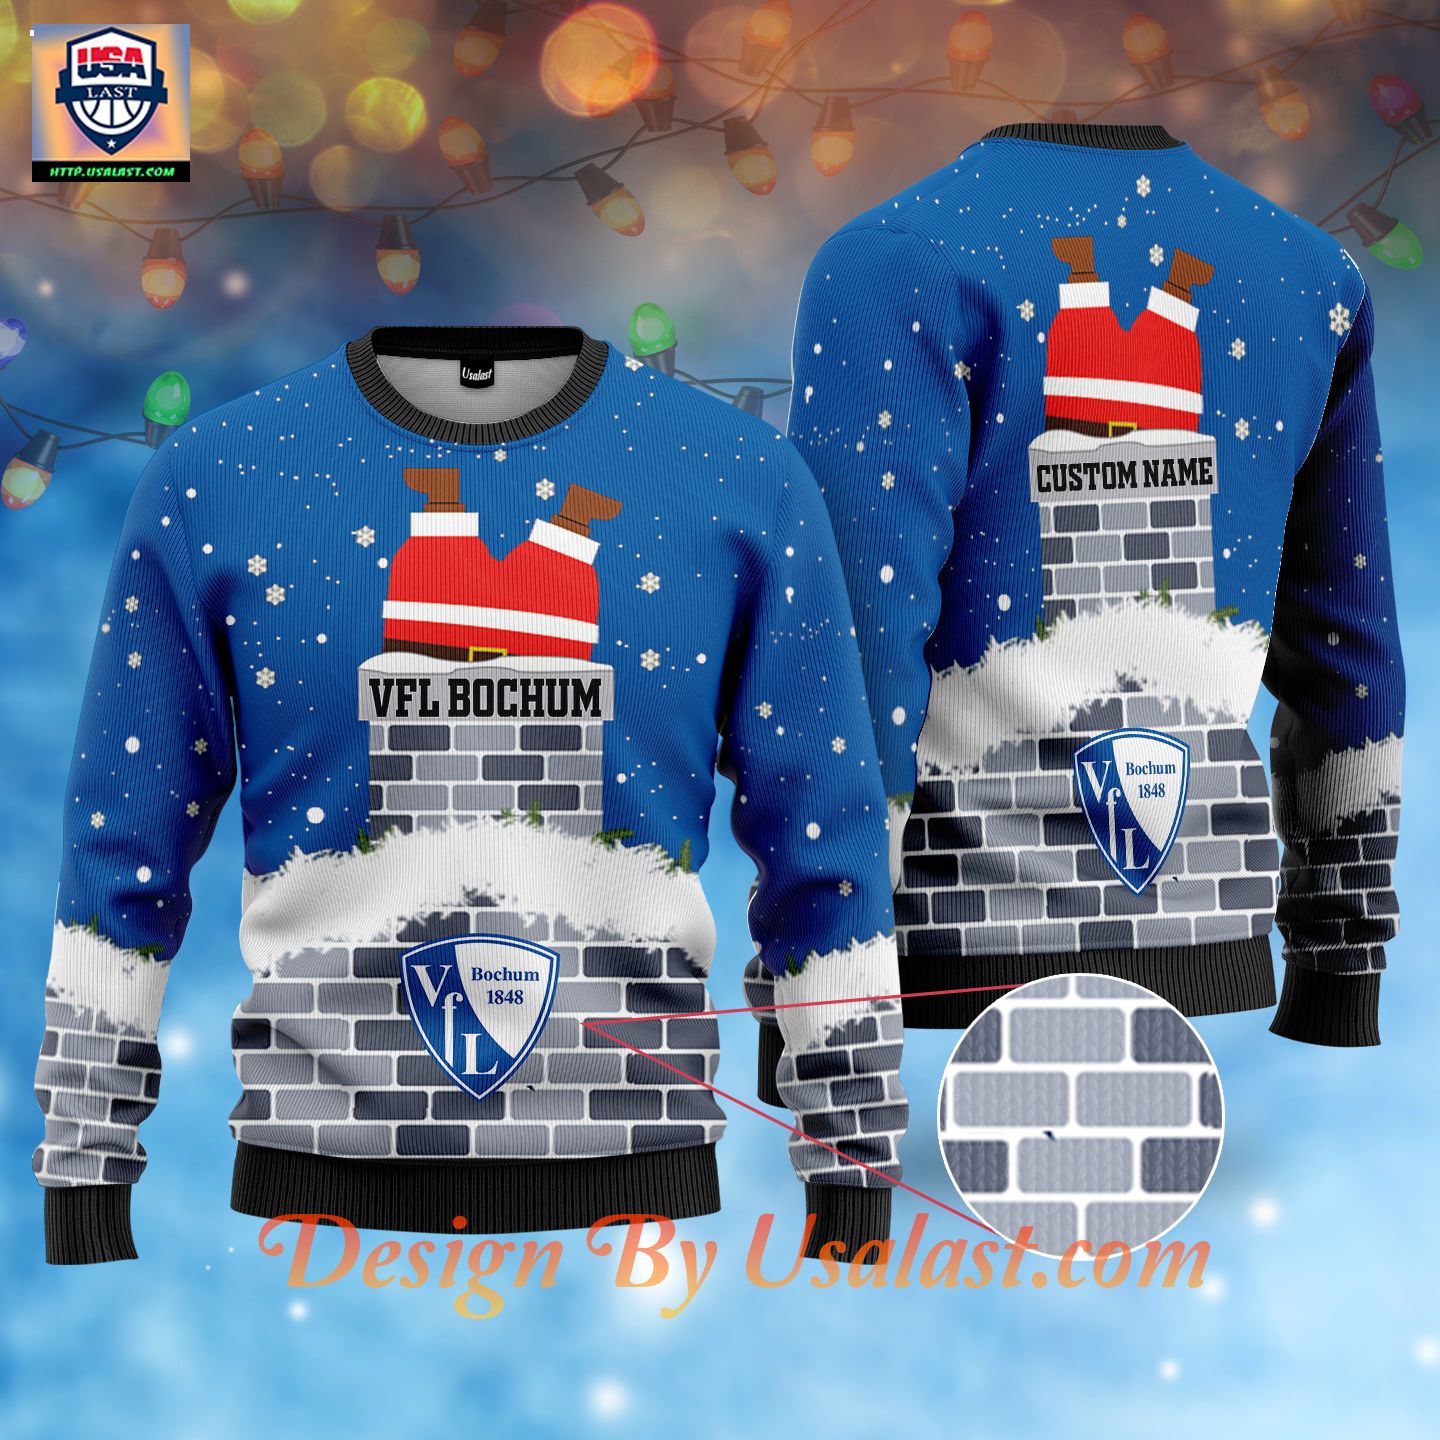 VfL Bochum Custom Name Ugly Christmas Sweater - Blue Version - It is too funny